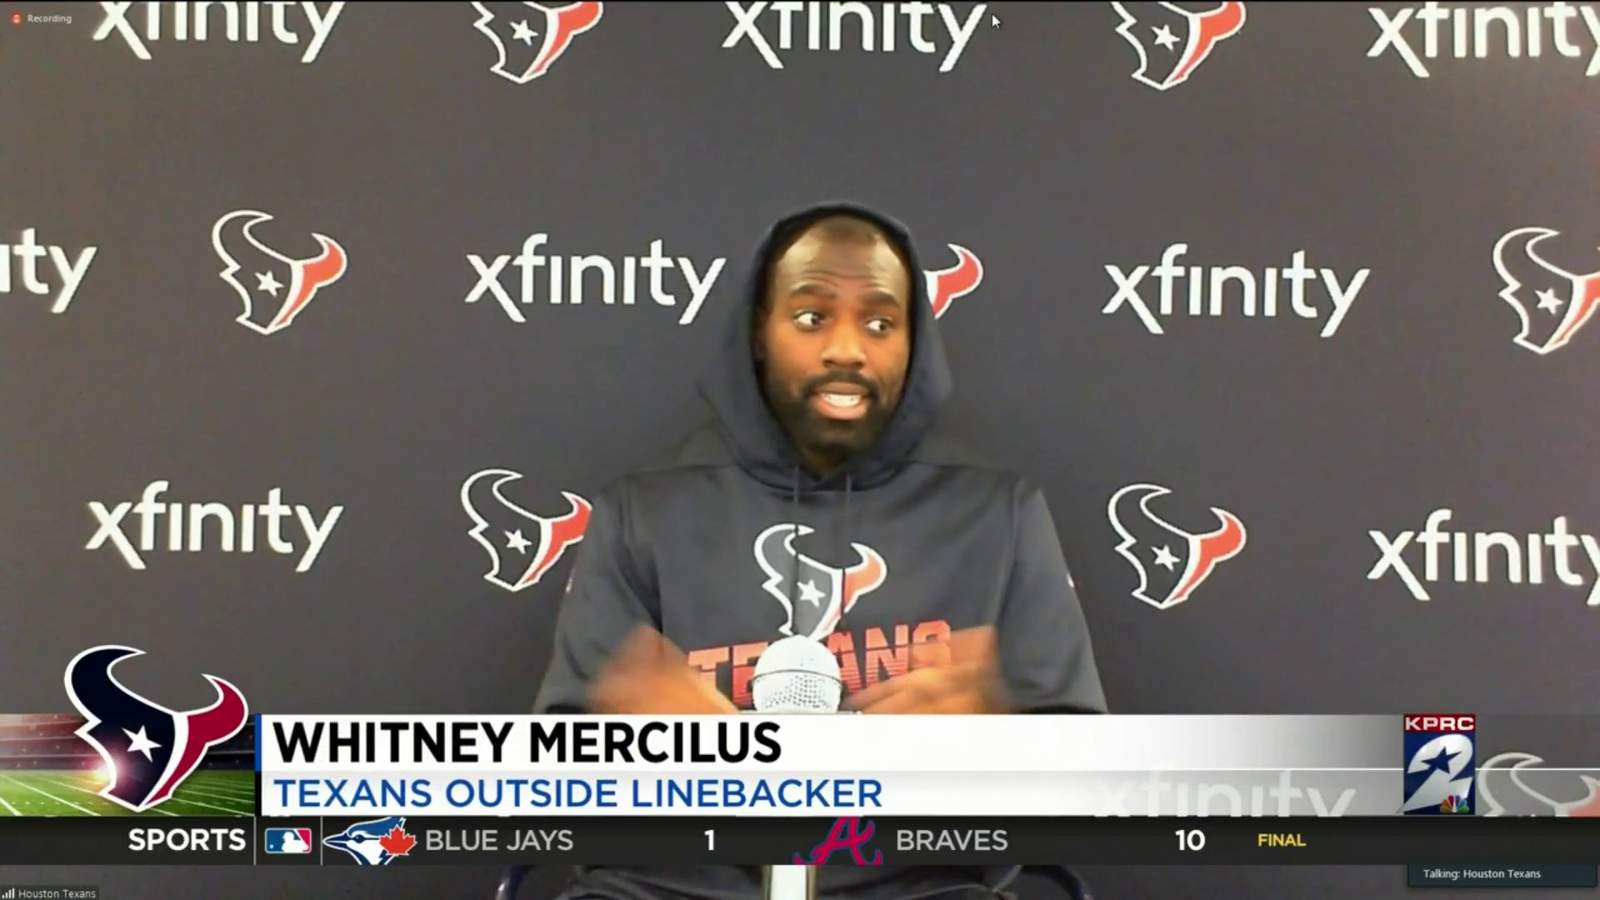 Texans Whitney Mercilus, Randall Cobb discuss making tough decision to play during pandemic